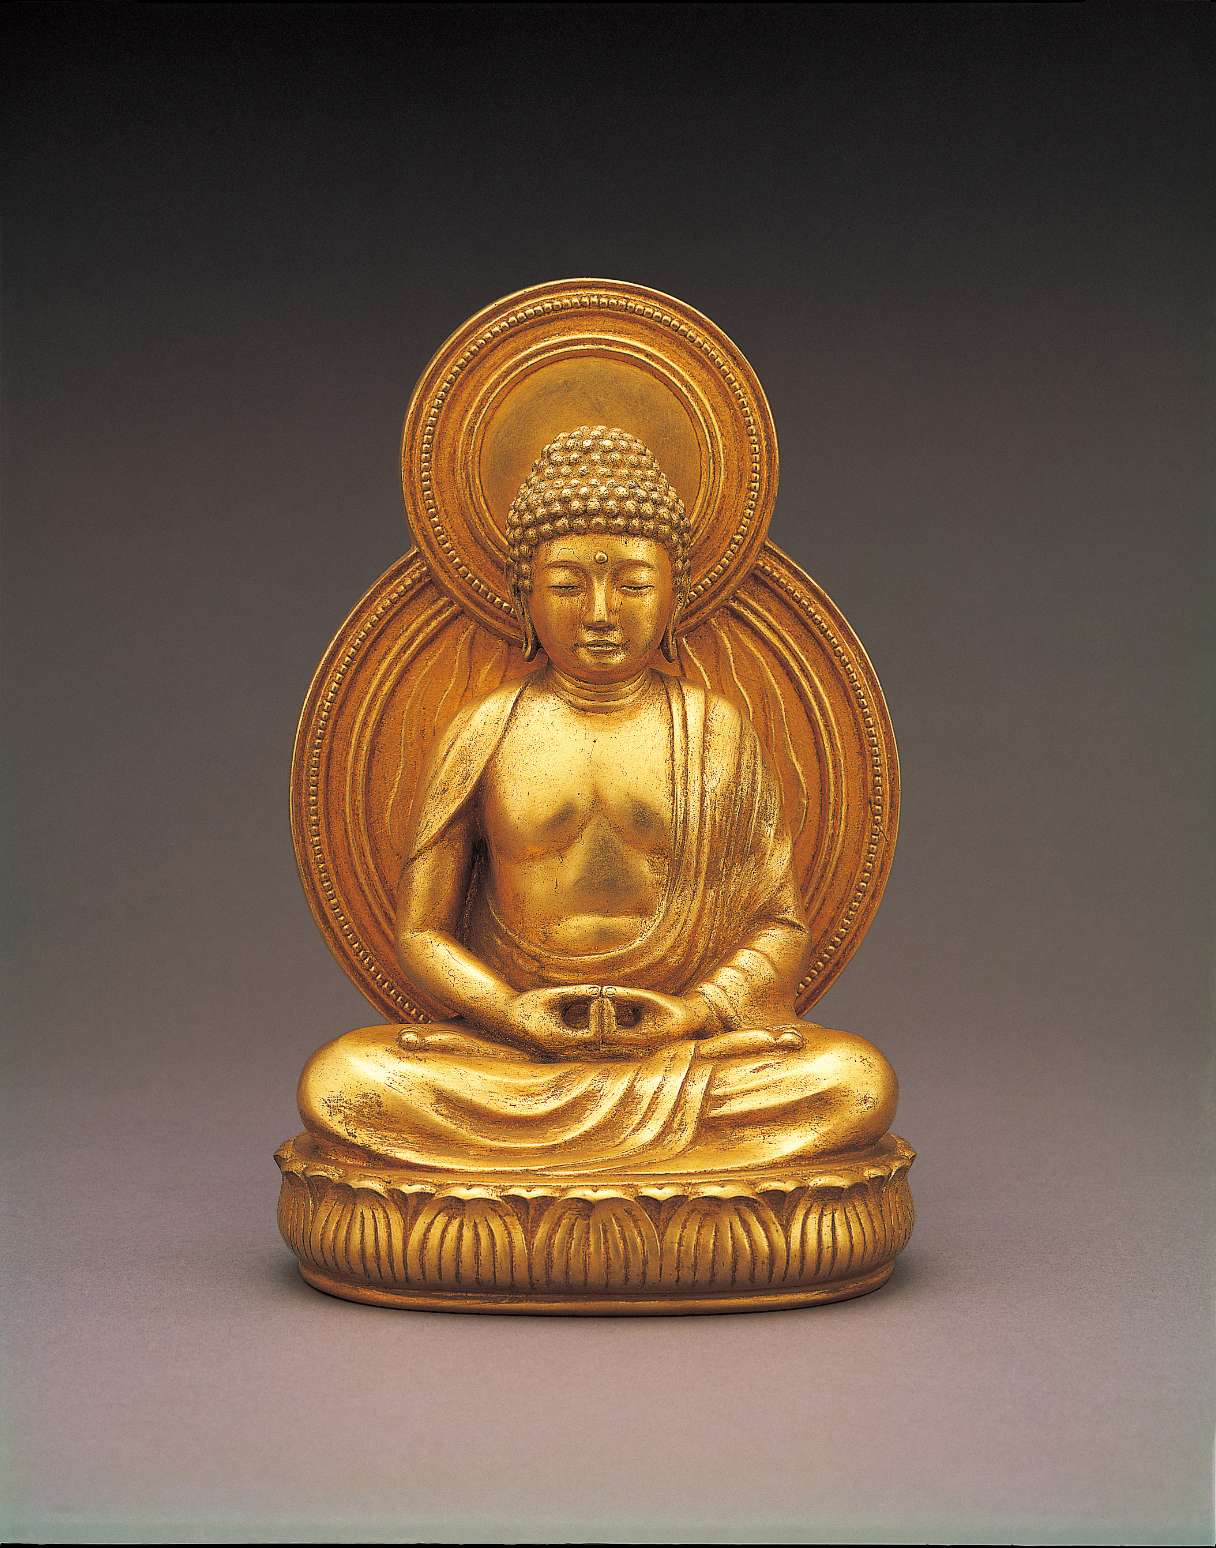 A lustrous golden hued statue of a buddha, sitting cross-legged atop a seat of curving lotus petals, hands in meditation, with a copper hued nimbus behind his body and head.